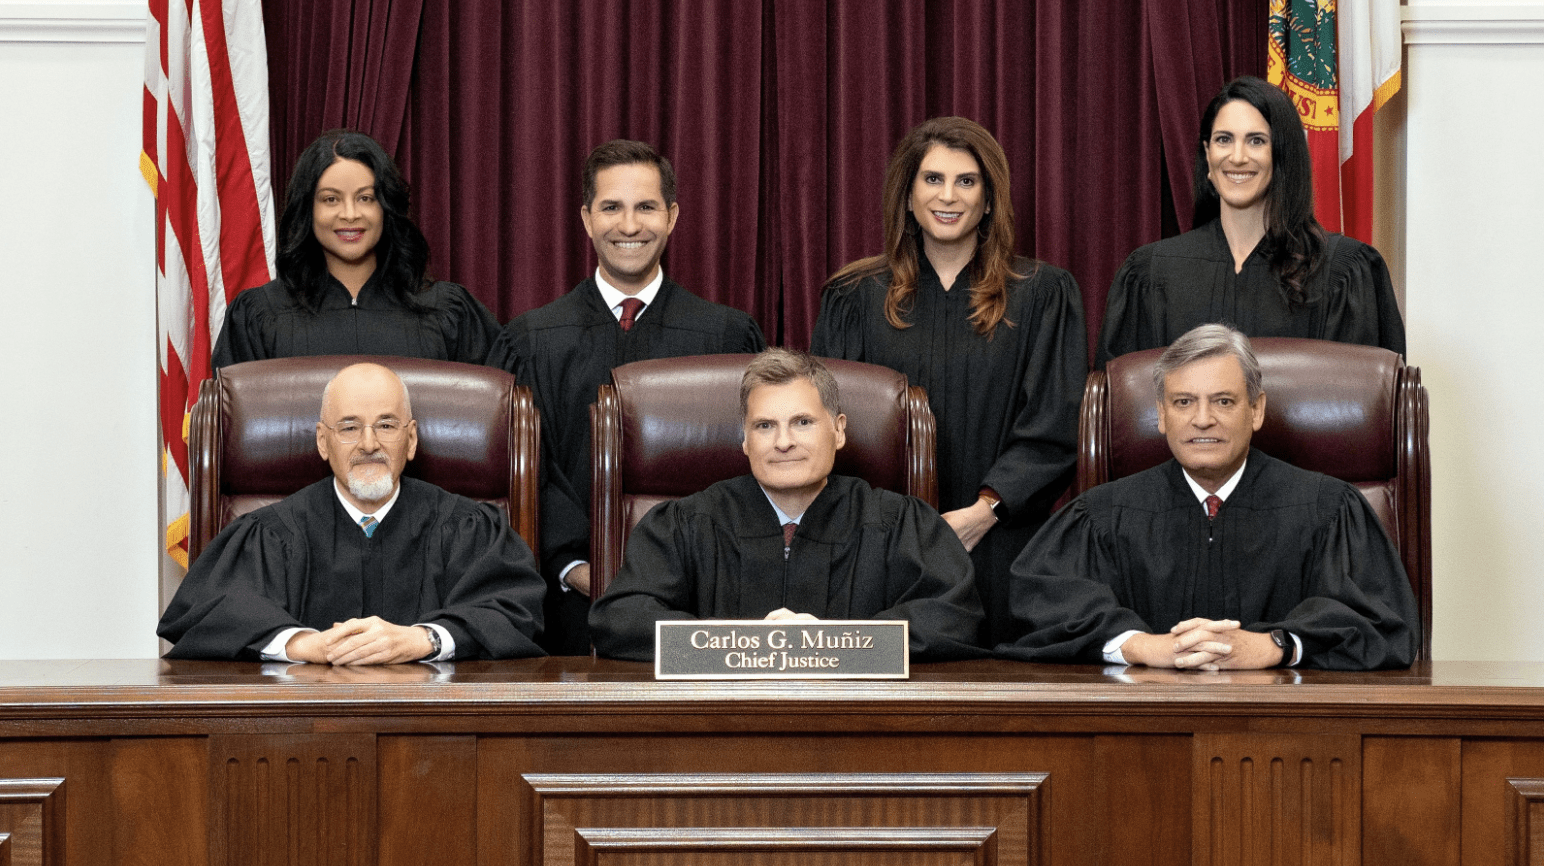 Conservative Florida Supremes say it’s ok for aspiring judge to tell voters she’s ‘a conservative’